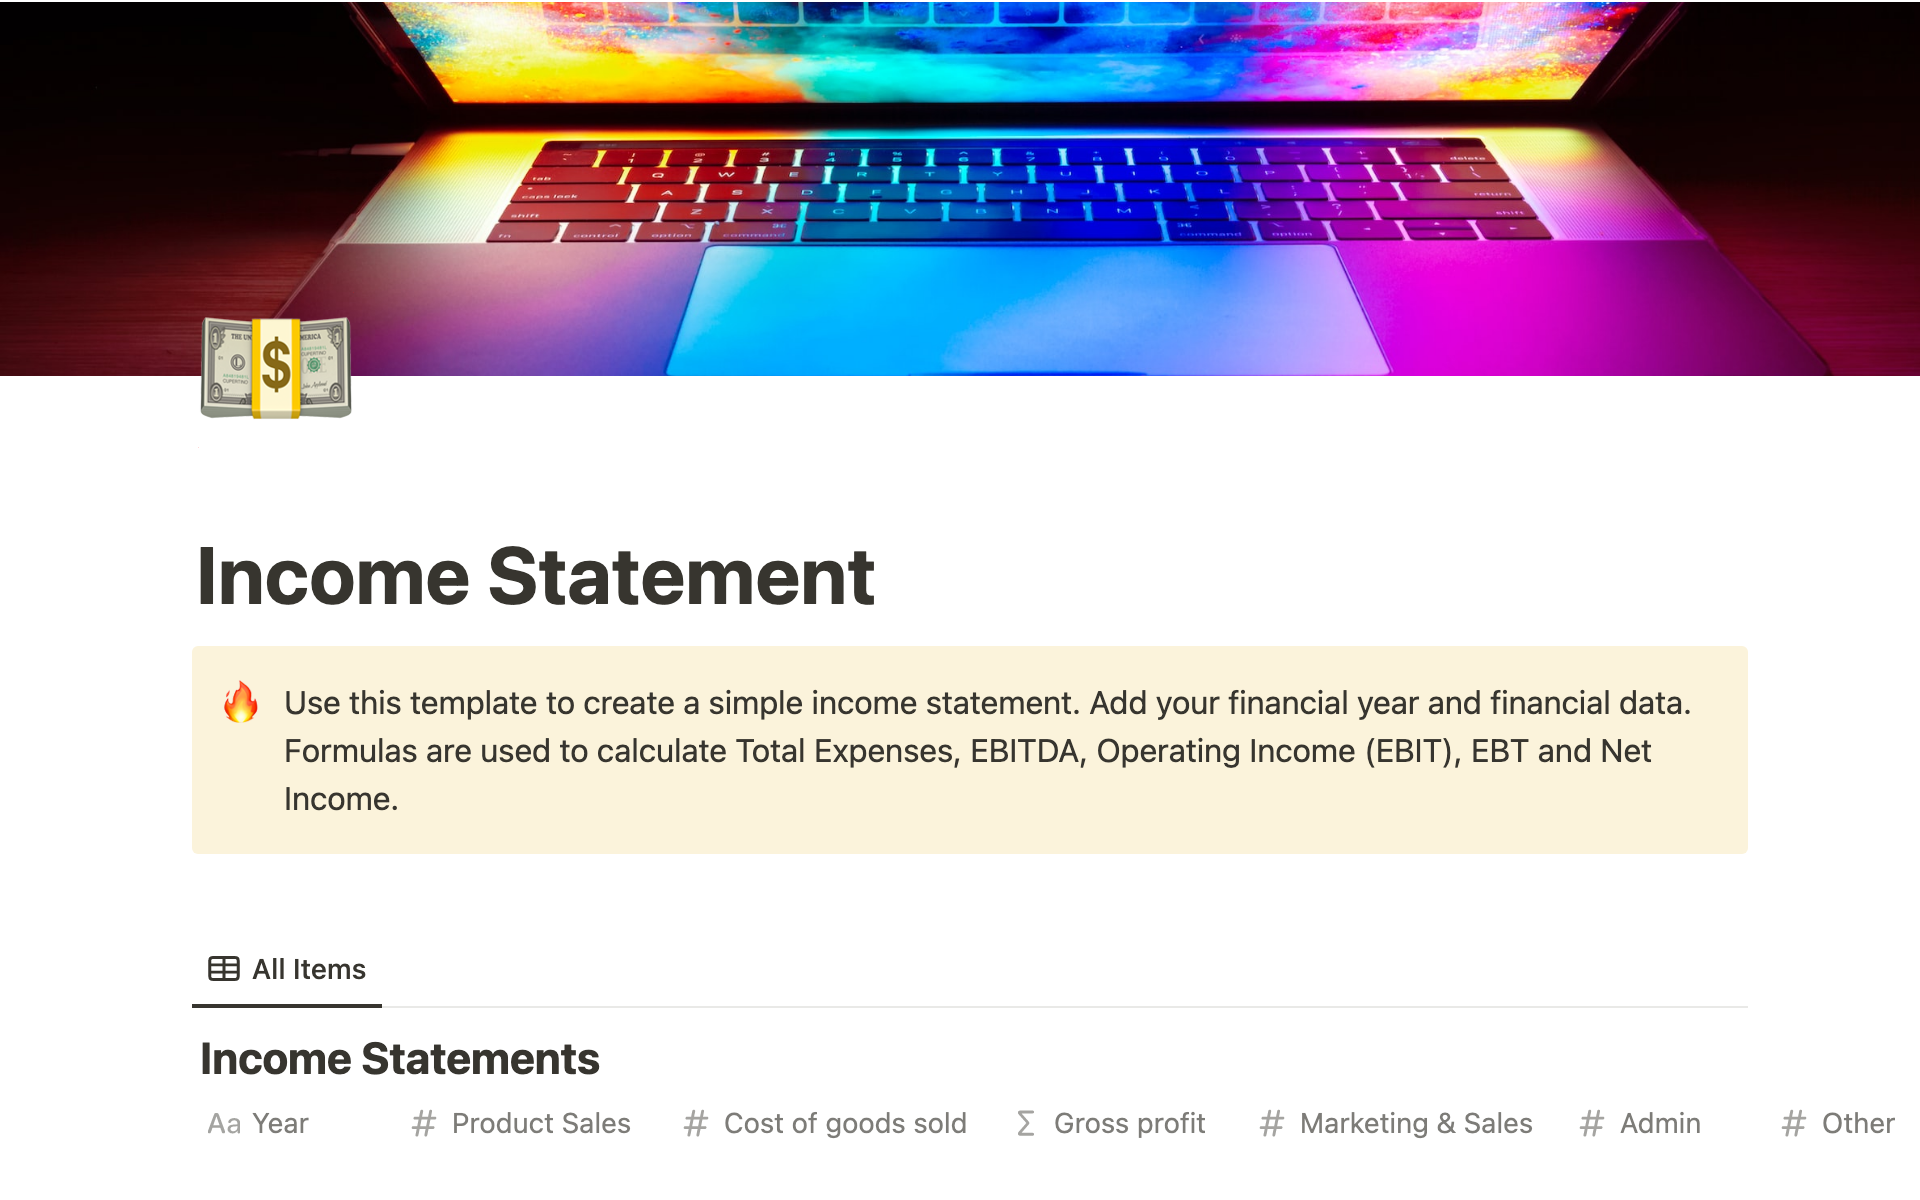 Use this template to create a simple income statement.